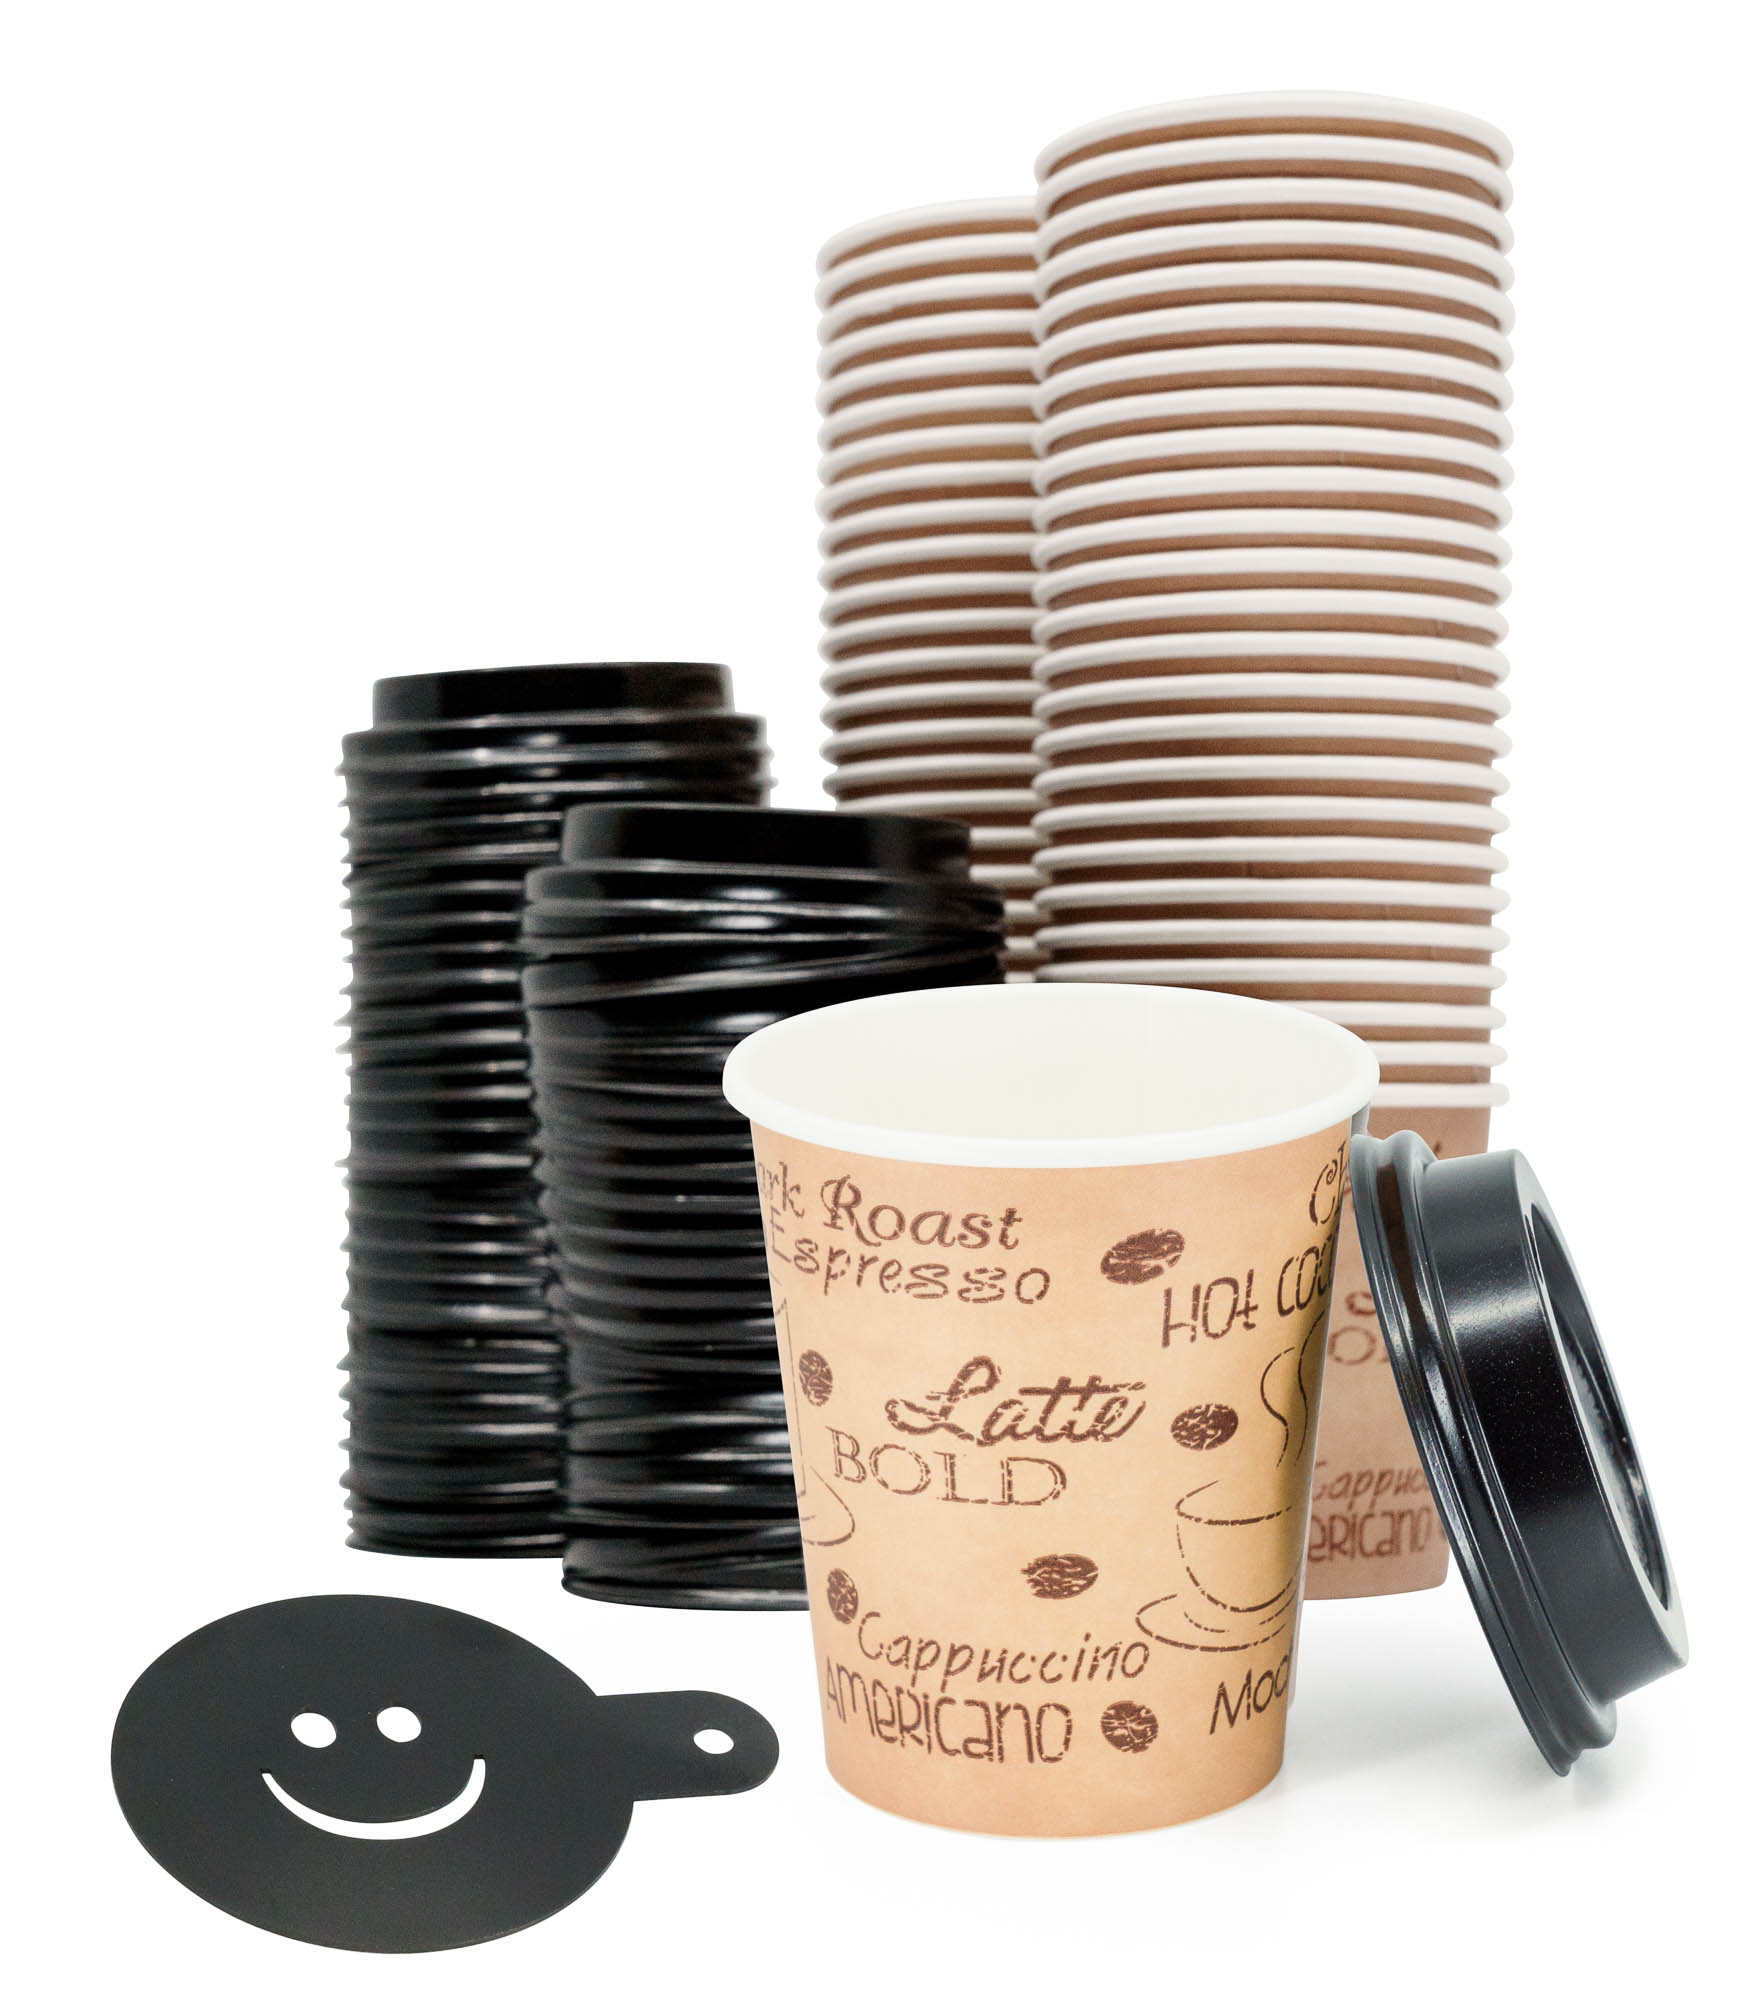 Disposable Paper Coffee Cups with Lids